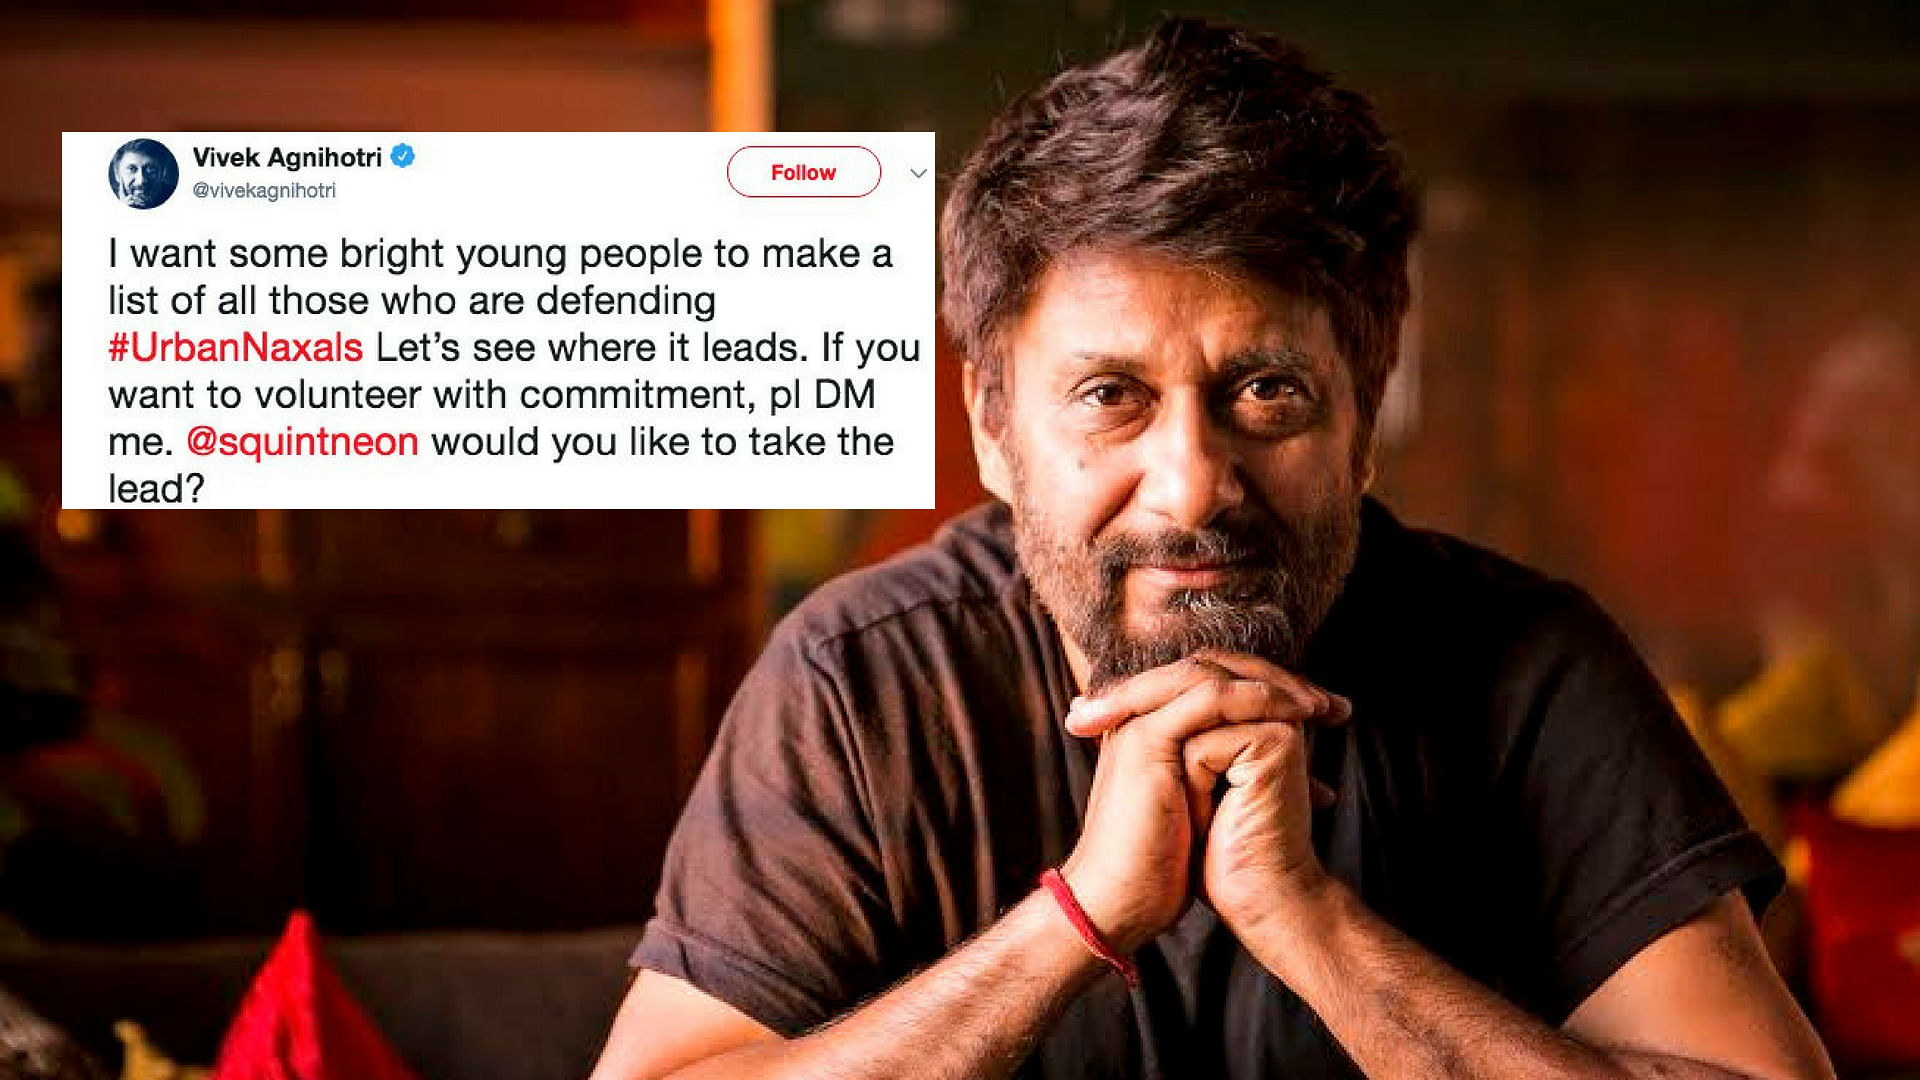 Filmmaker and author Vivek Agnihotri tweeted a call to “make a list of those who are defending #UrbanNaxals”.